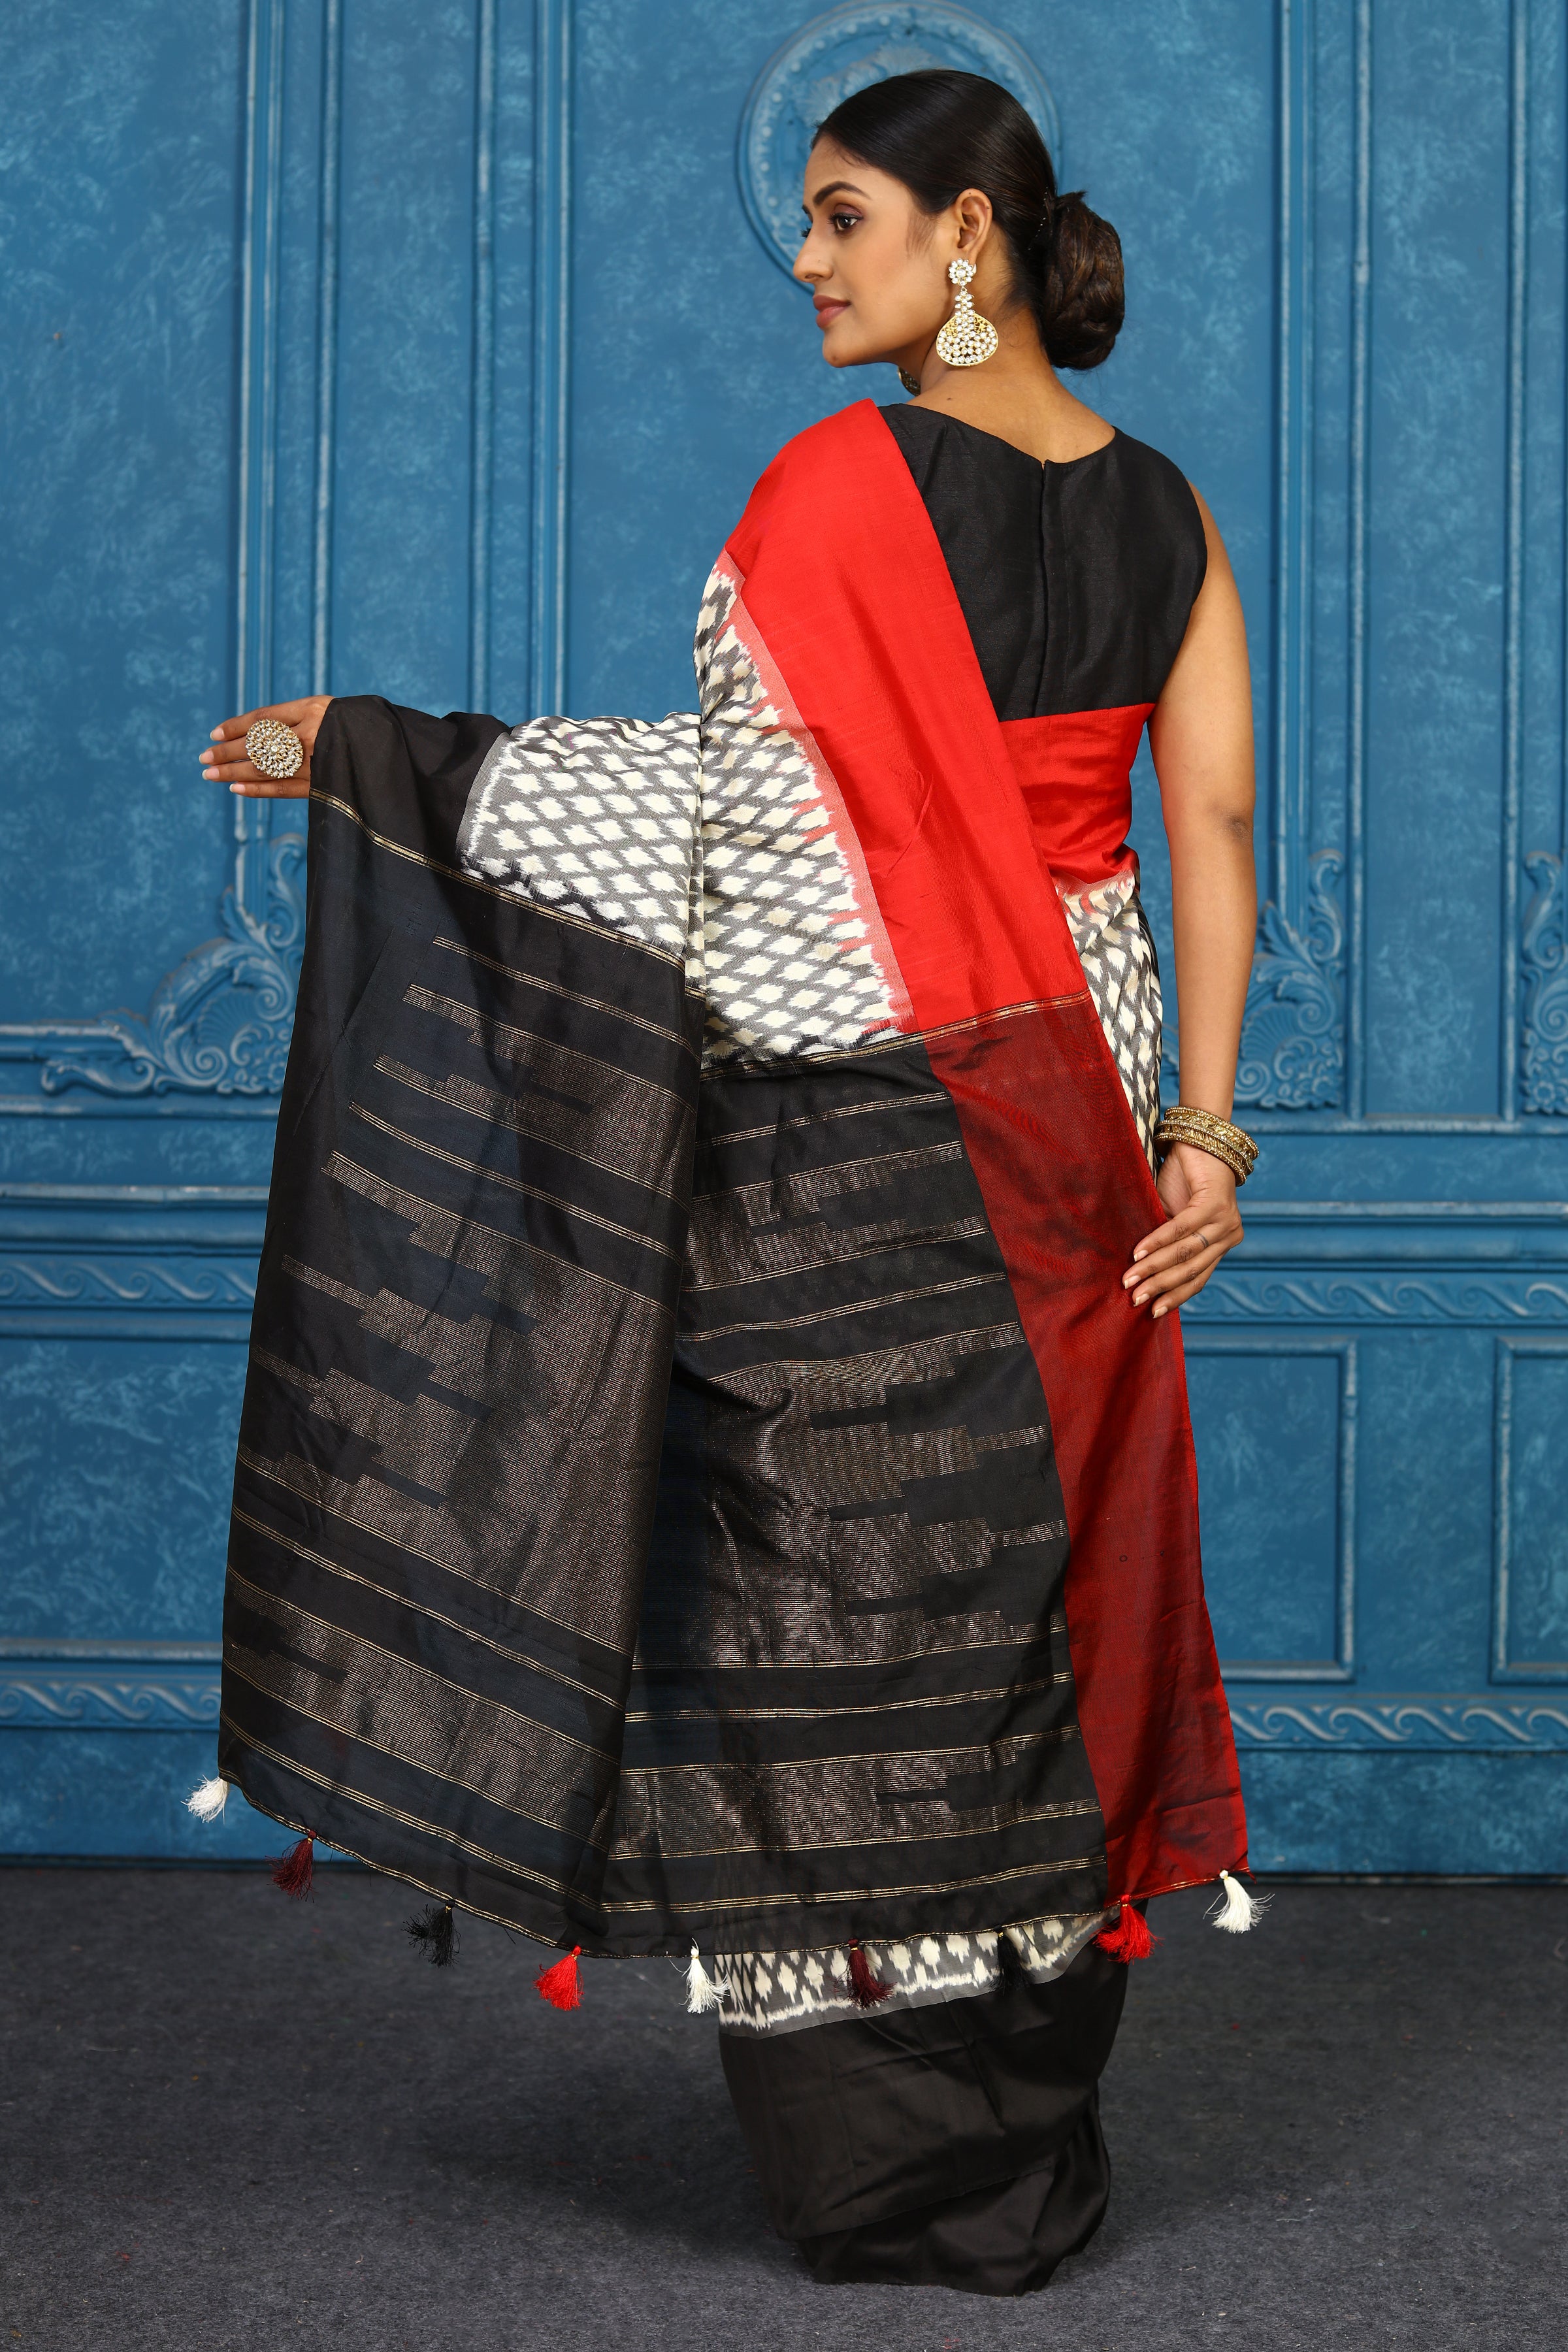 Buy beautiful off-white and grey pochampally ikkat sari online in USA with red black border. Look your best on festive occasions in latest designer sarees, pure silk sarees, Kanchipuram sarees, handwoven sarees, tussar silk sarees, embroidered sarees from Pure Elegance Indian clothing store in USA.-back